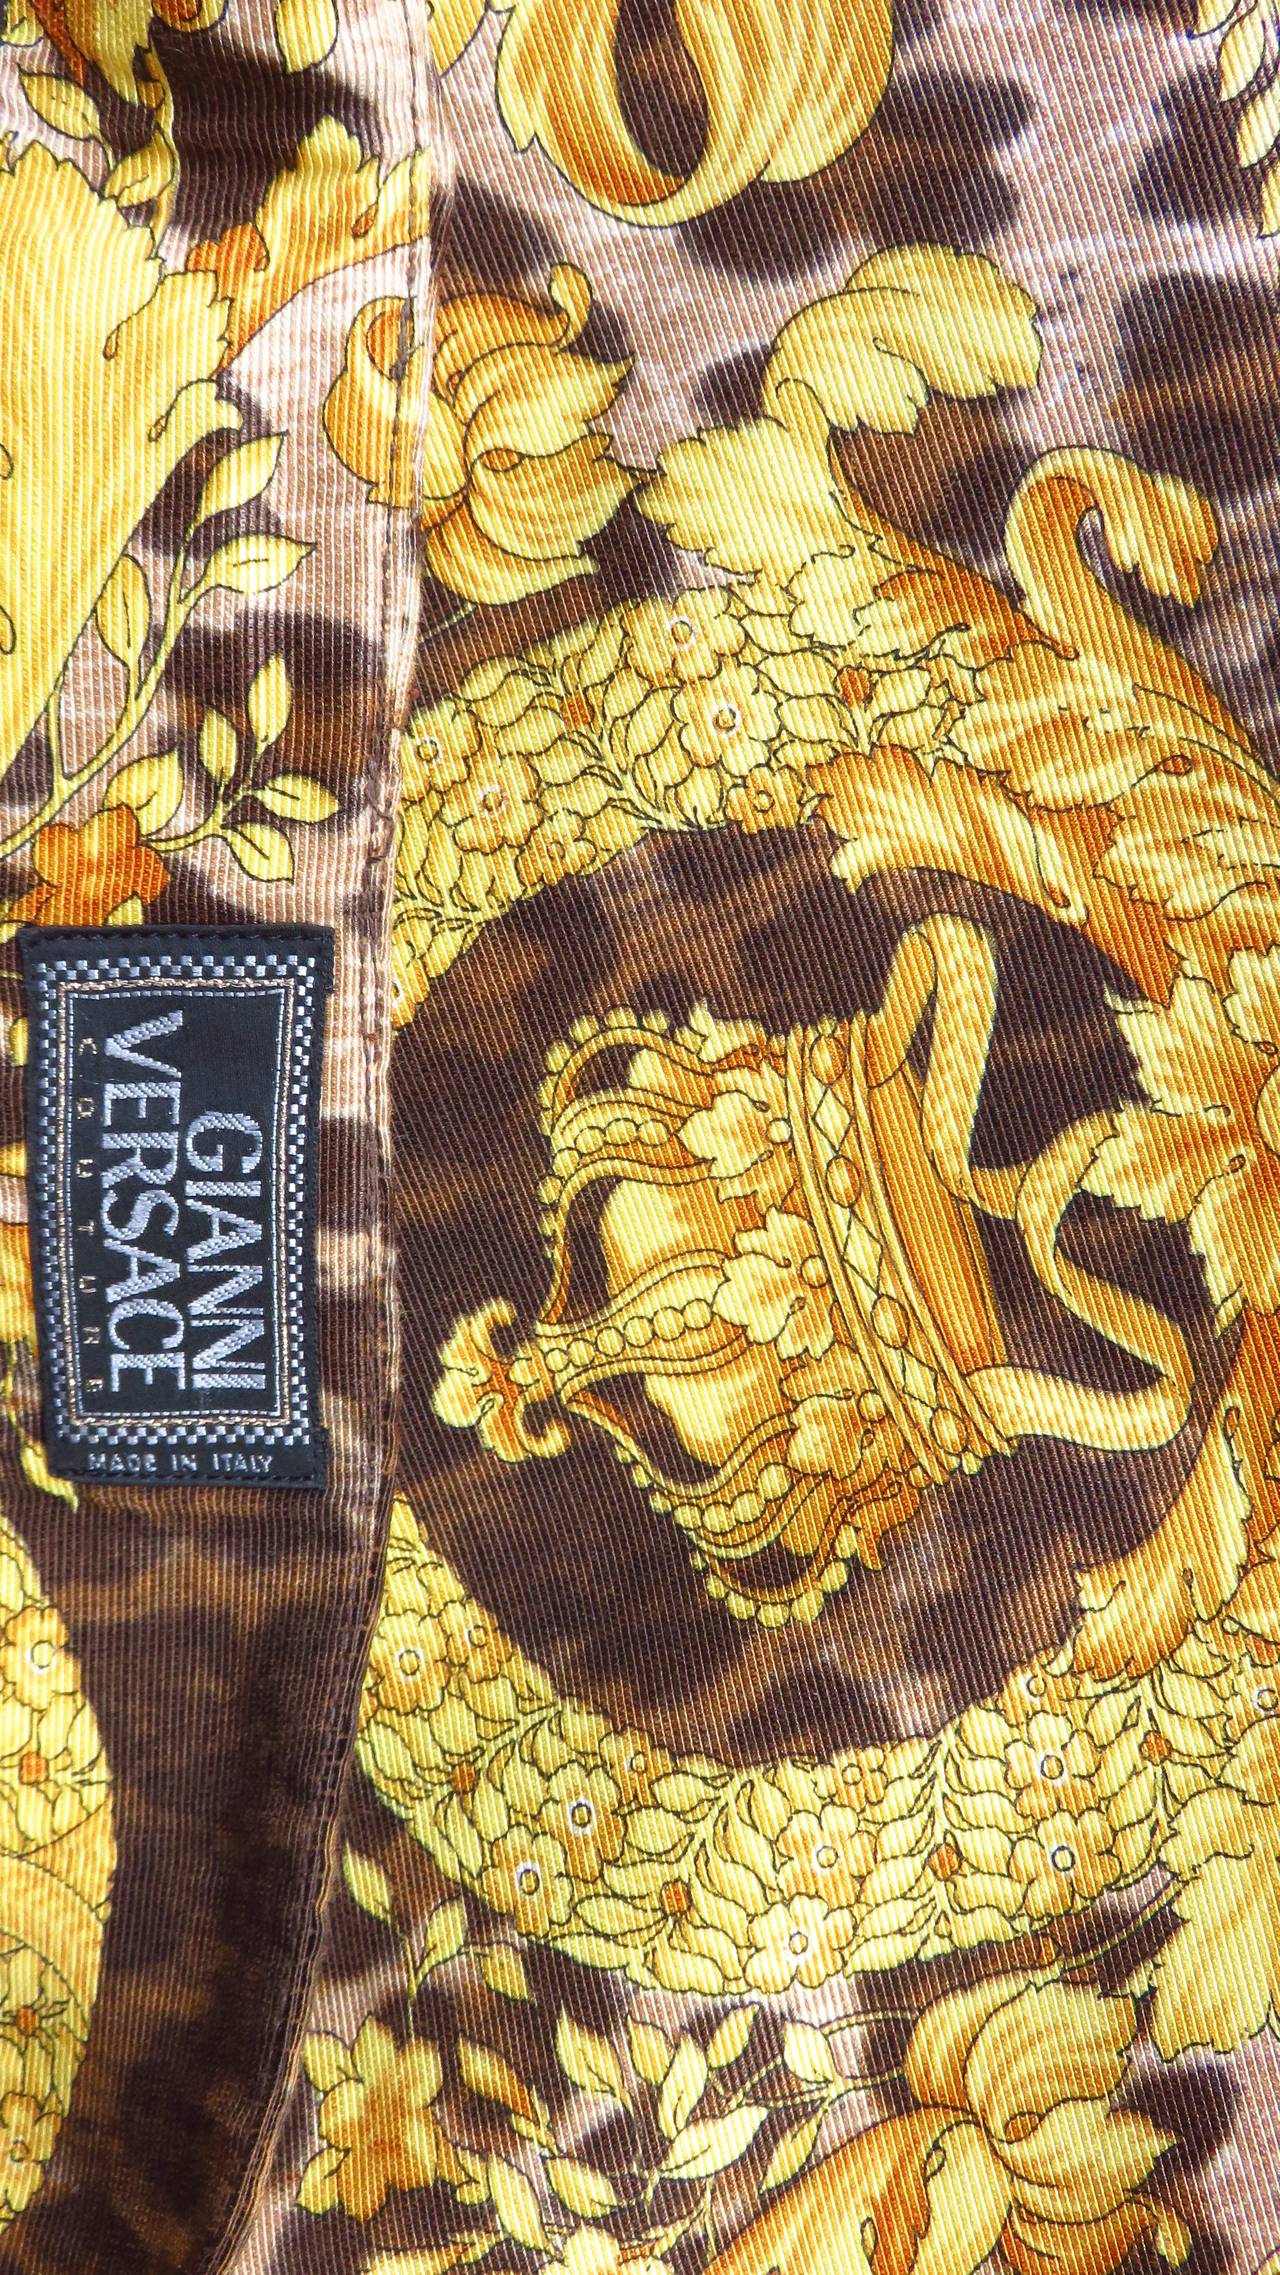  Gianni Versace Couture Leopard Baroque Print Skirt 1990s 5